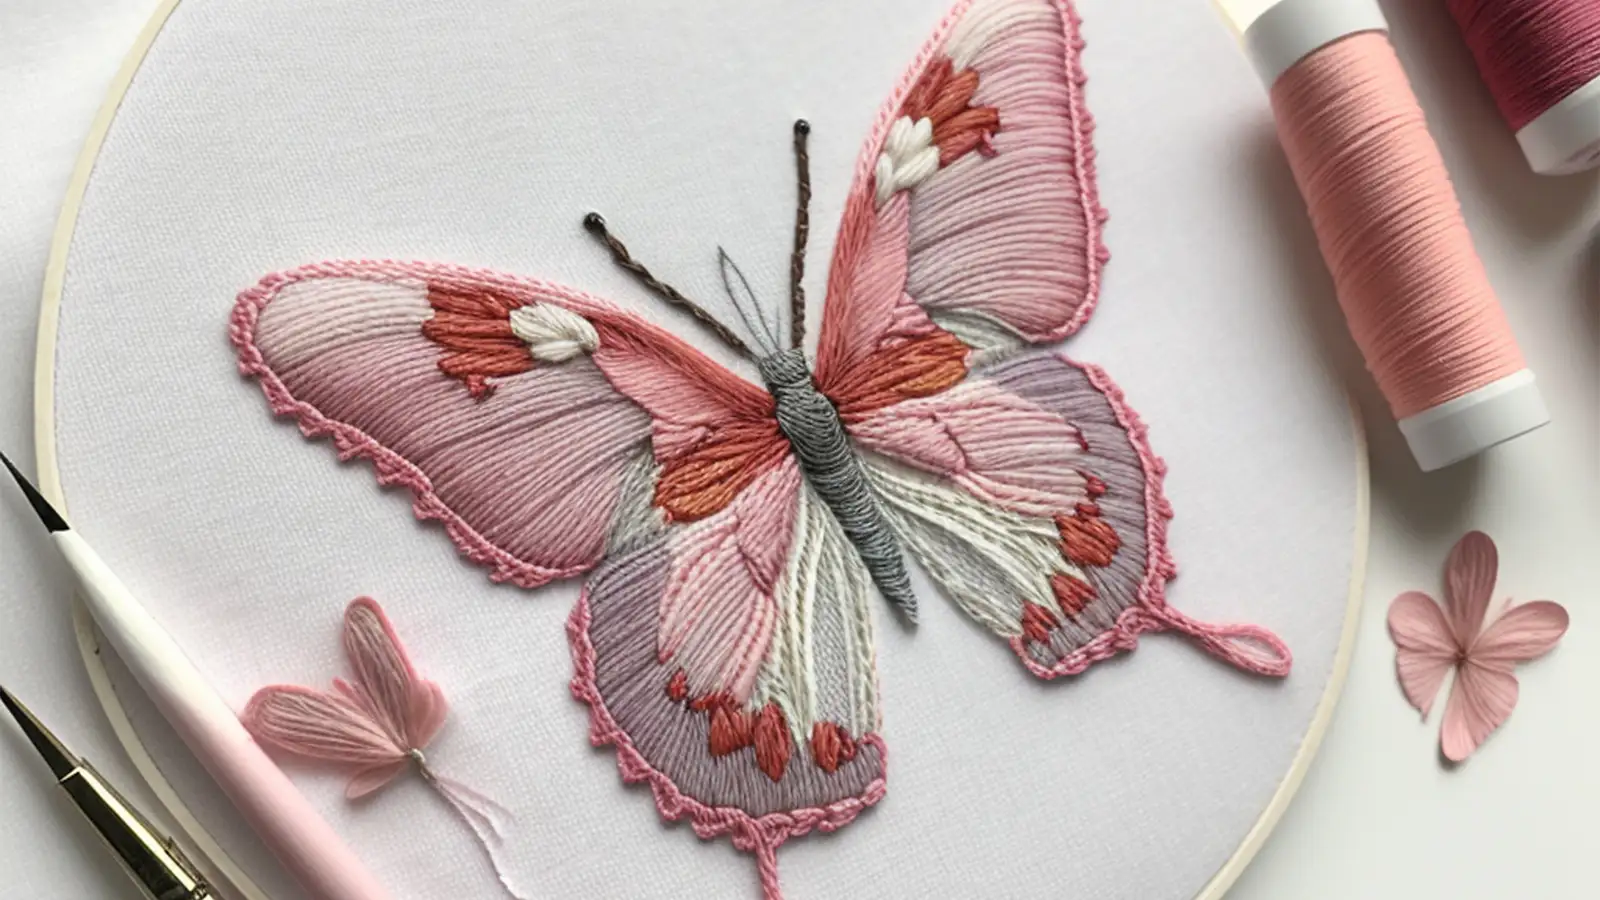 How to Embroider a Butterfly: Using Basic Stitches for Embroidery